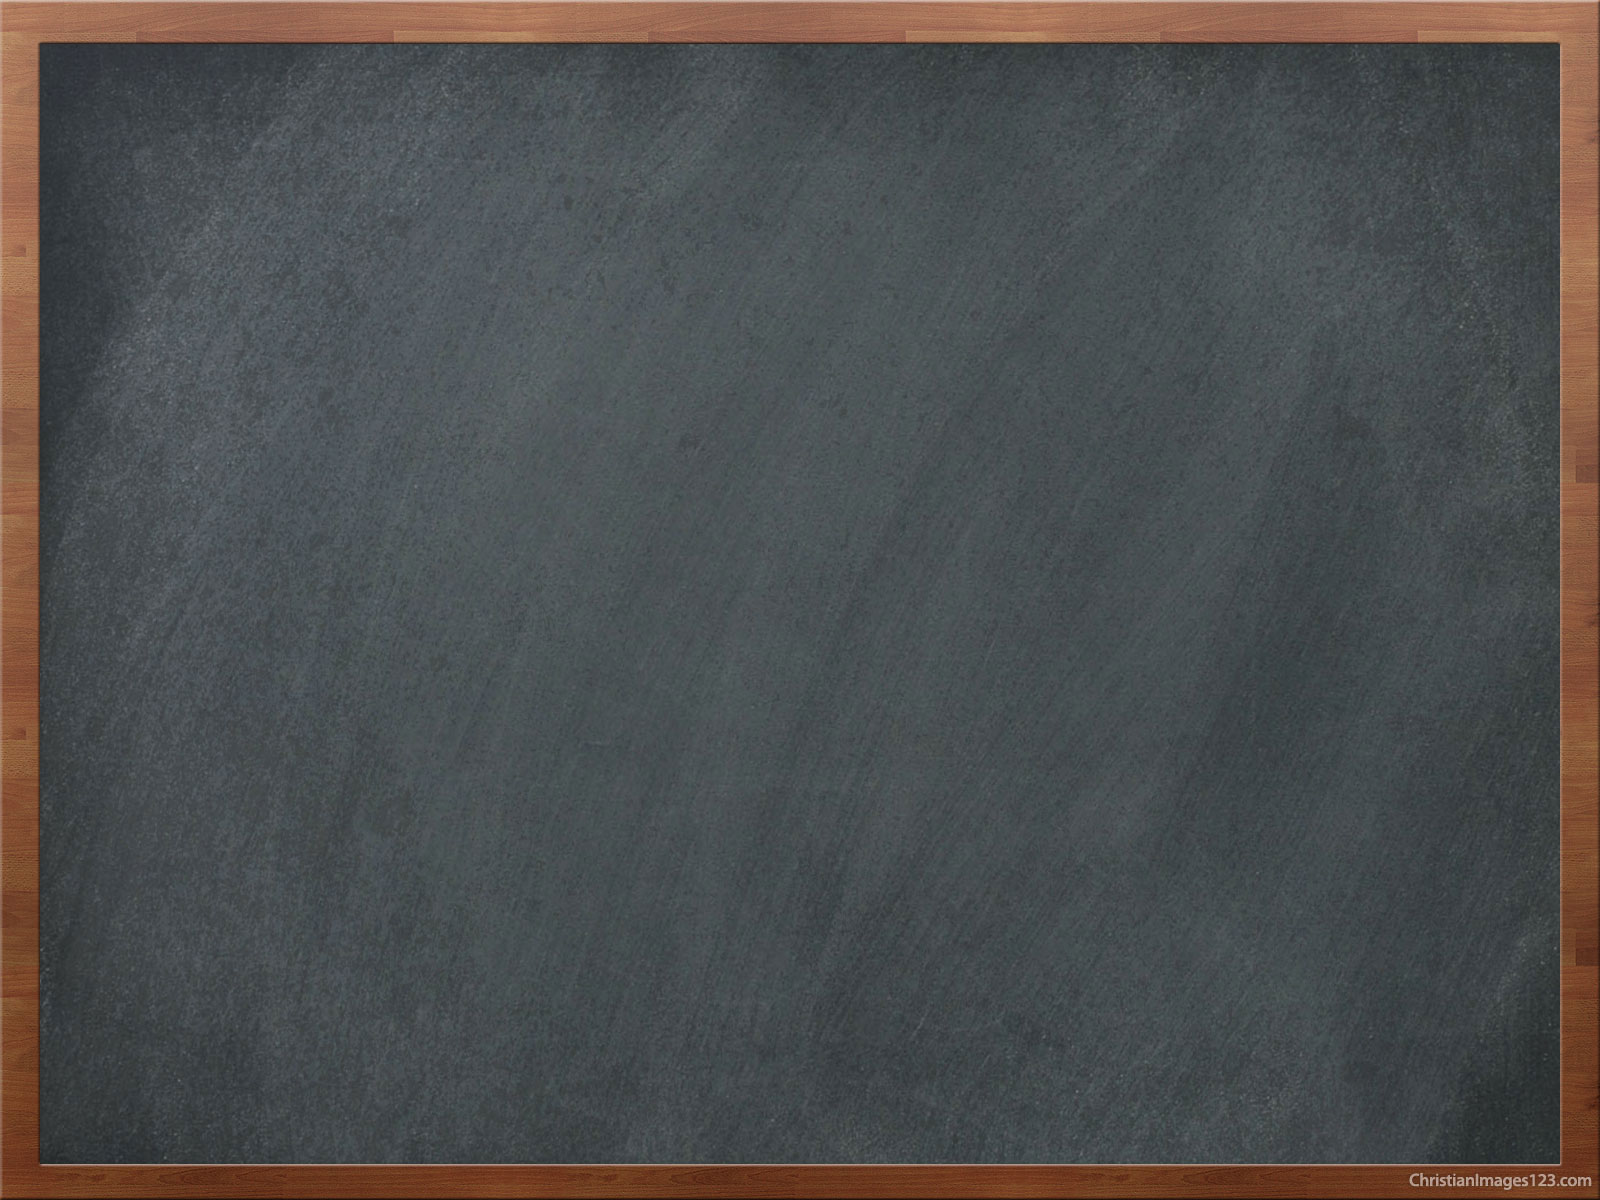 Chalkboard Background With Wood Frame | Free Christian Images